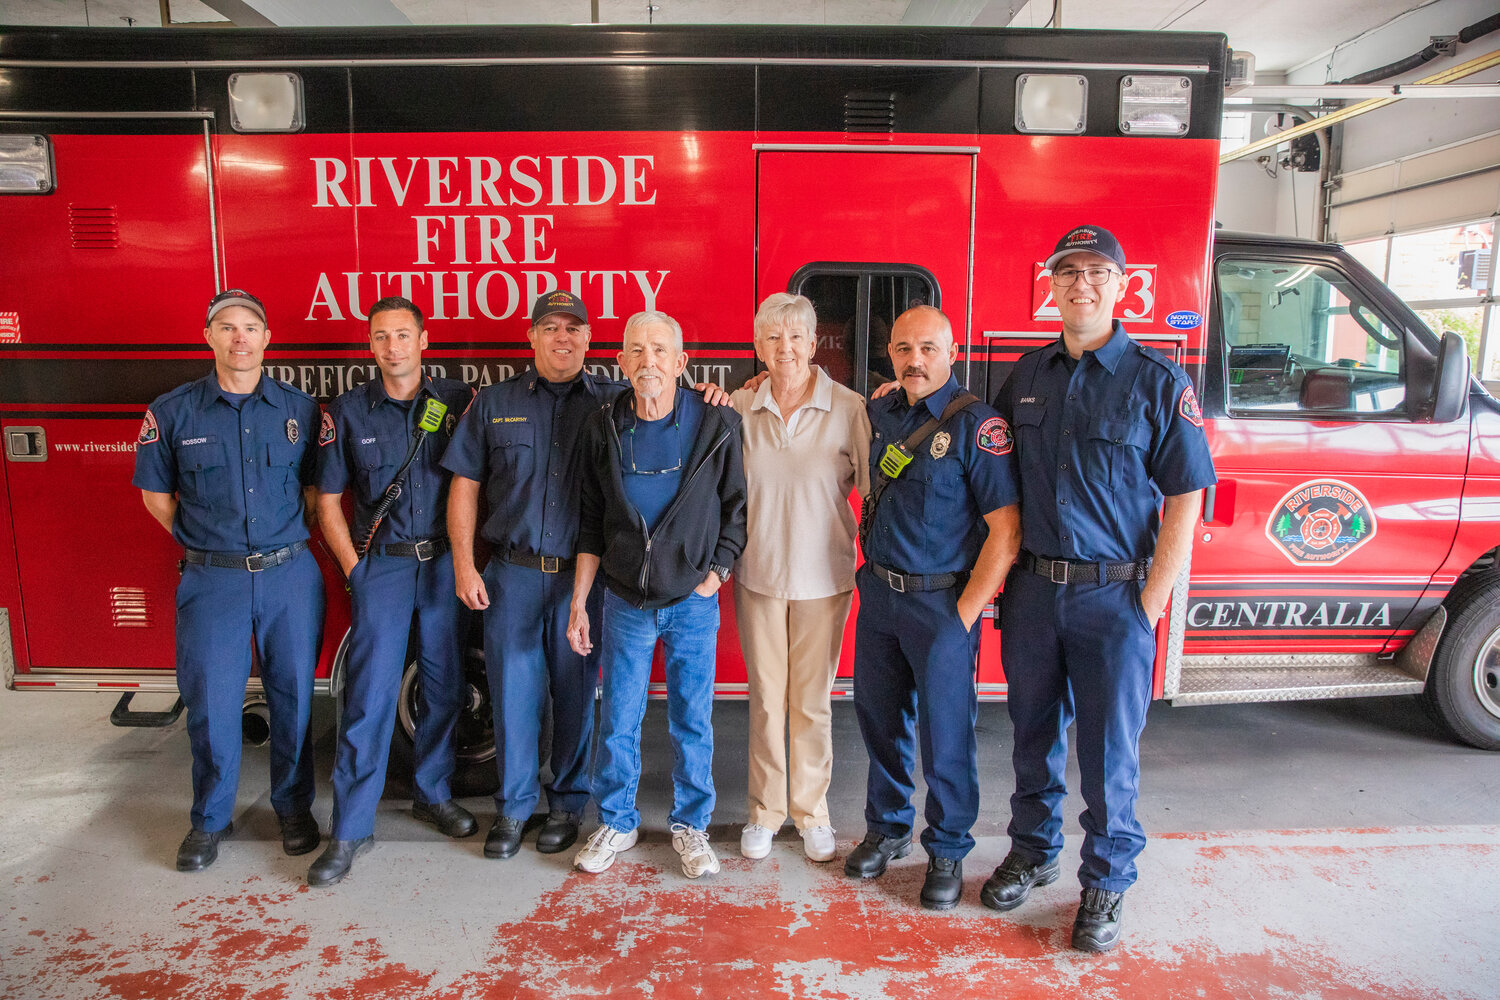 Scott Olson, 67, of Centralia, and his sister, Robyn, smile for a photo with Riverside firefighters from left, Randy Rossow, Shay Goff, Captain Casey McCarthy, Jade Gross and Darren Banks at the Riverside Fire Station along North Pearl Street on Wednesday, July 12. Olson went to the station to thank EMTs and firefighter crews from Riverside Fire Authority who assisted an American Medical Response unit responding using a defibrillator and CPR machine to stabilize Olson’s heart April 7, 2023.